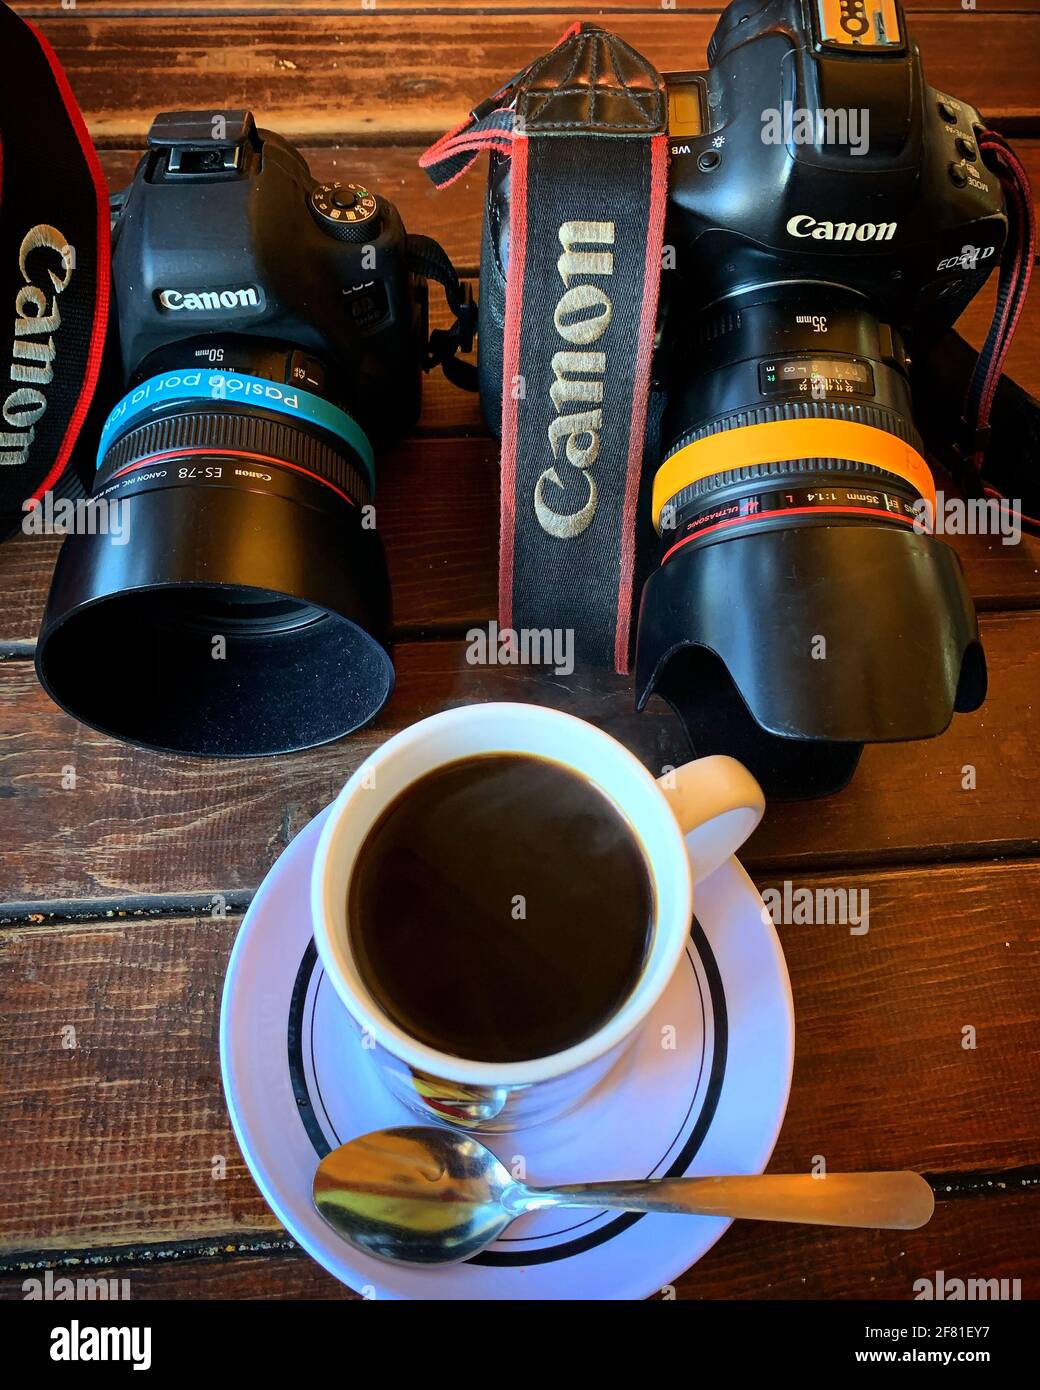 Canon 1dx Mark II, Canon 6D Mark II camera, Coffee cup and spoon on wooden  table in Hermosillo, Mexico. Camara Canon 1dx Mar II, Canon 6D Mark II,  Taza de cafe y